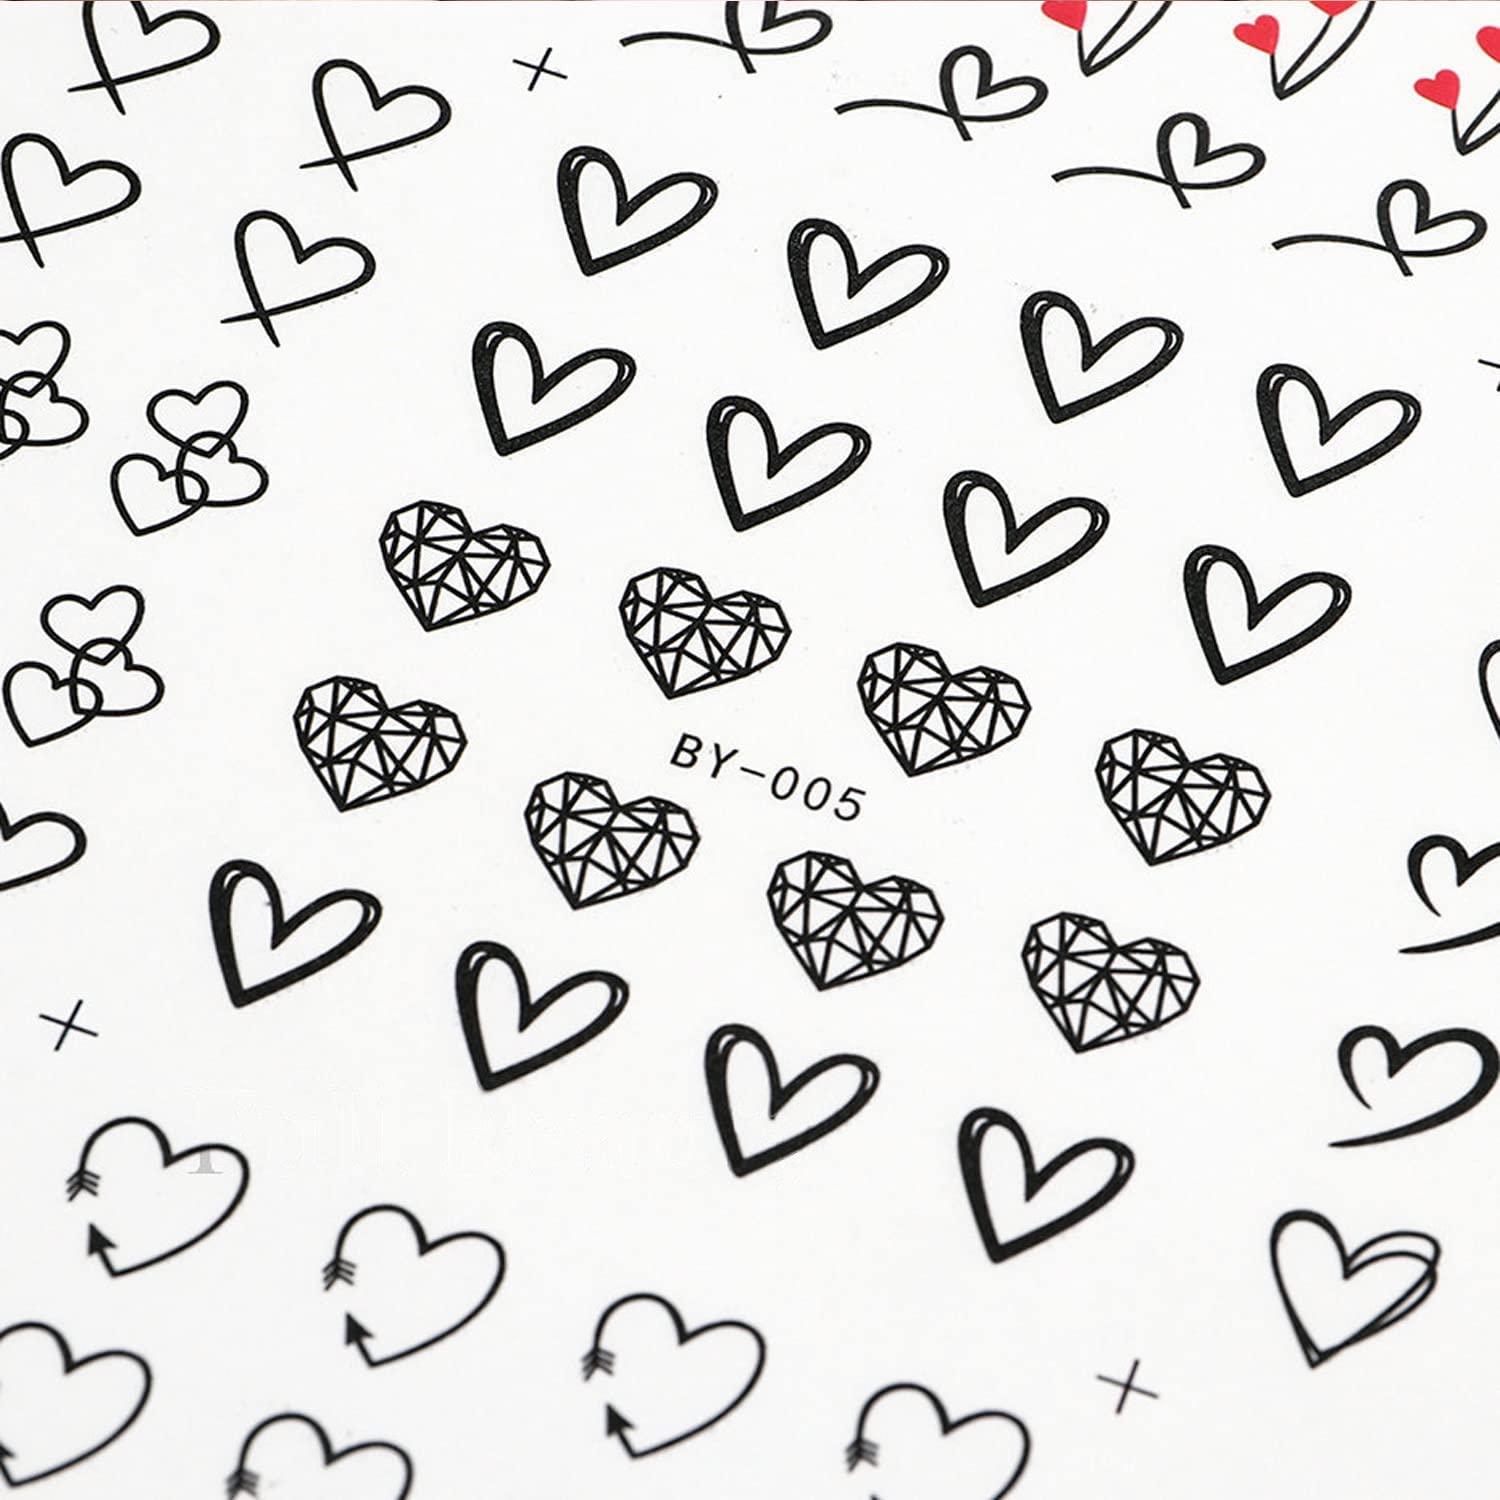 Valentines Day Stickers Decorative Cut Out Red Hearts Set Isolated